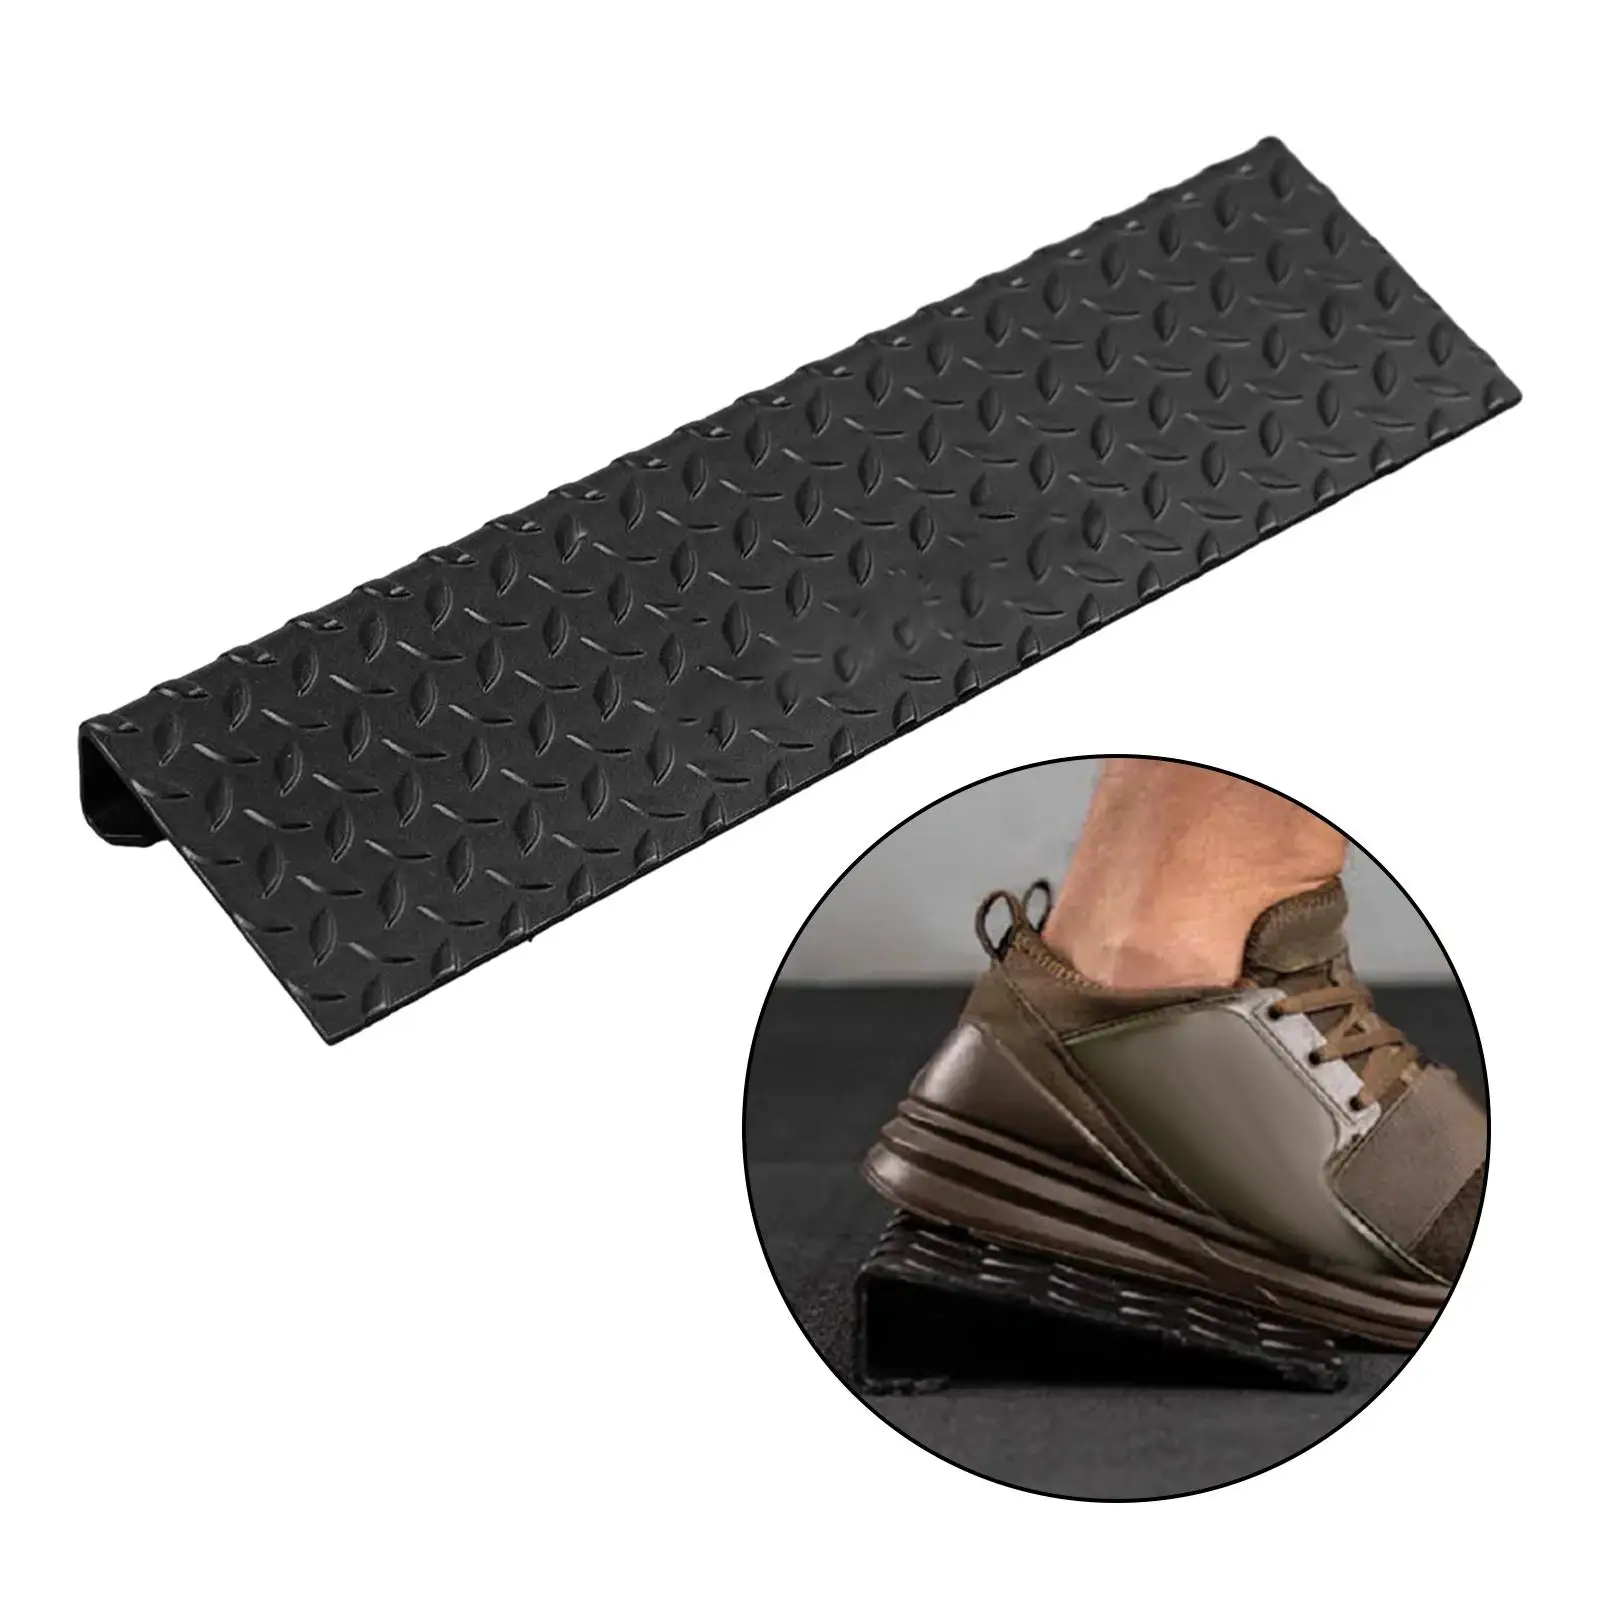 Slant Board Calf Stretcher Ankle Foot Squats Training Equipment Gym Fitness Professional Workout Leg Stretch Calf Stretch Board